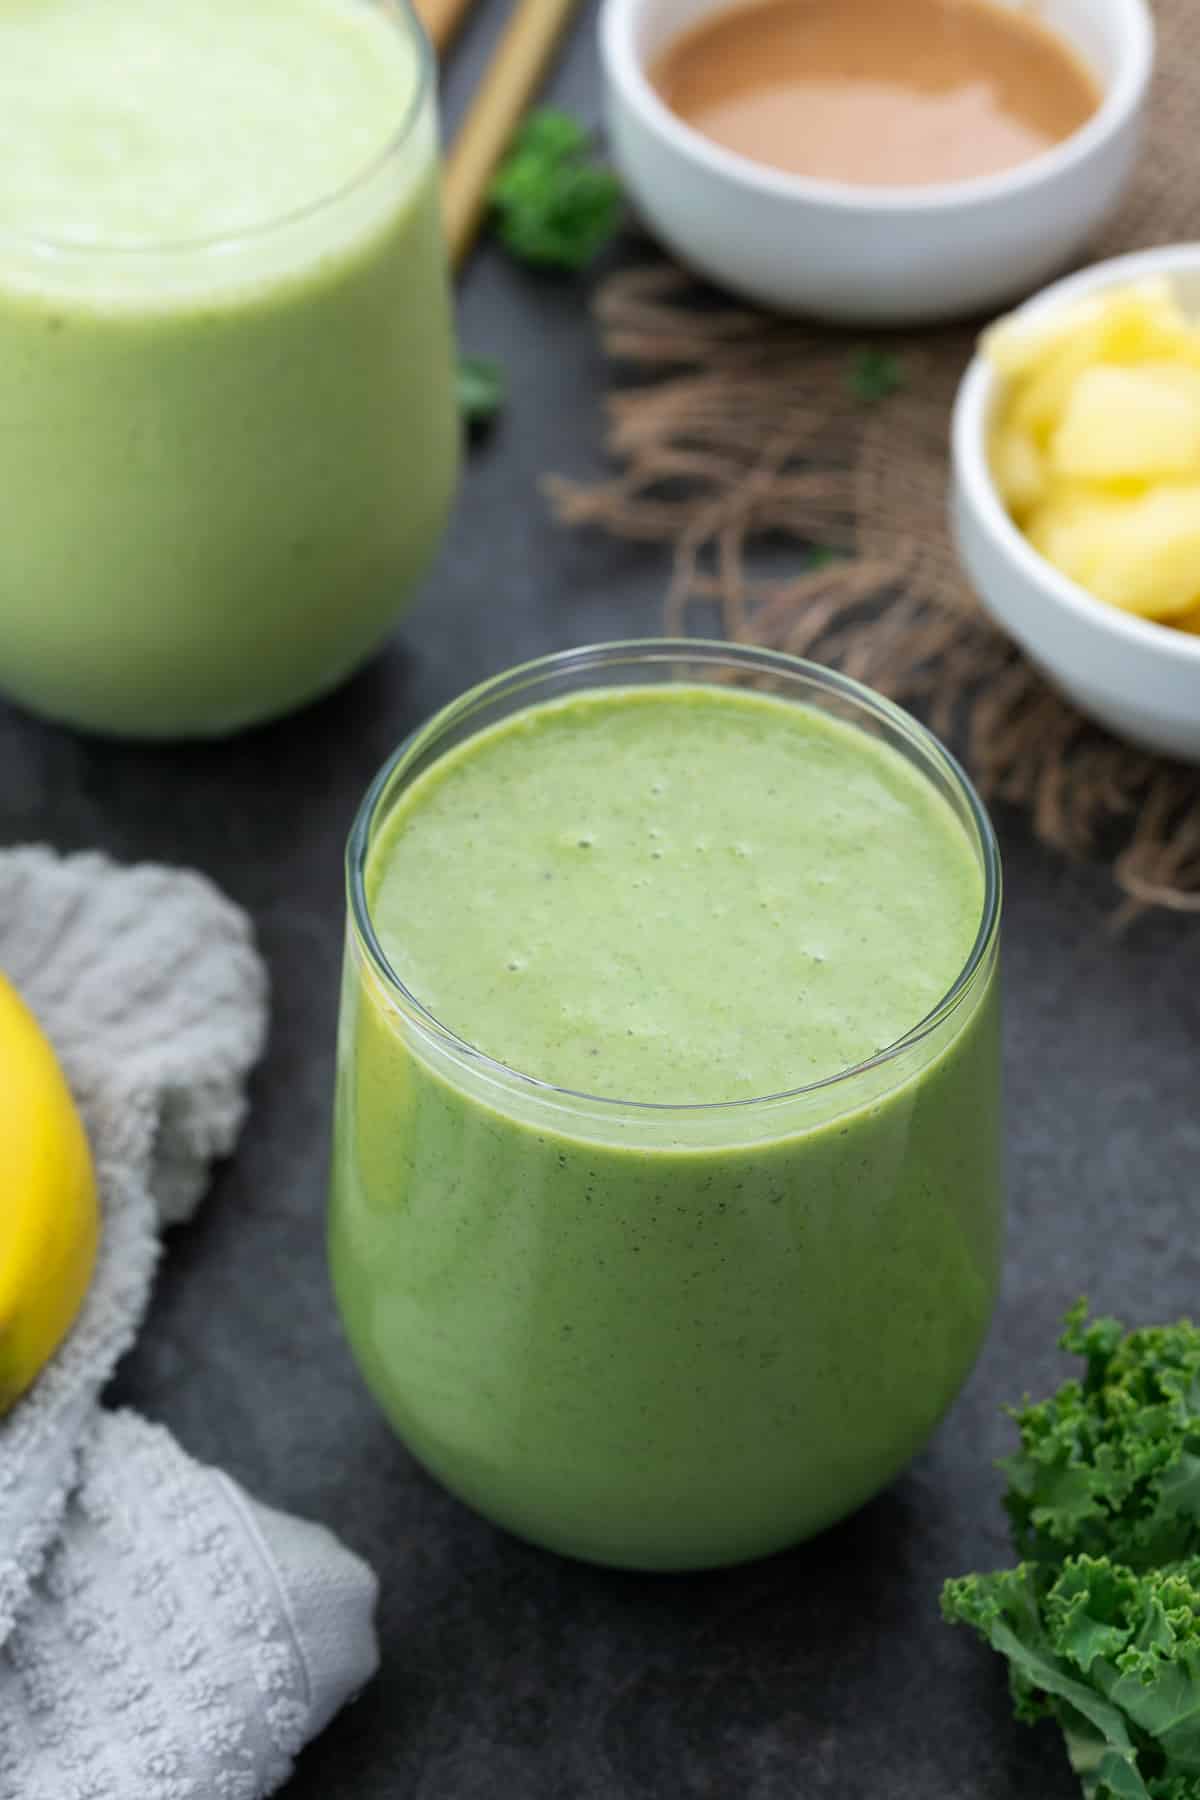 Kale Pineapple Smoothie in a glass